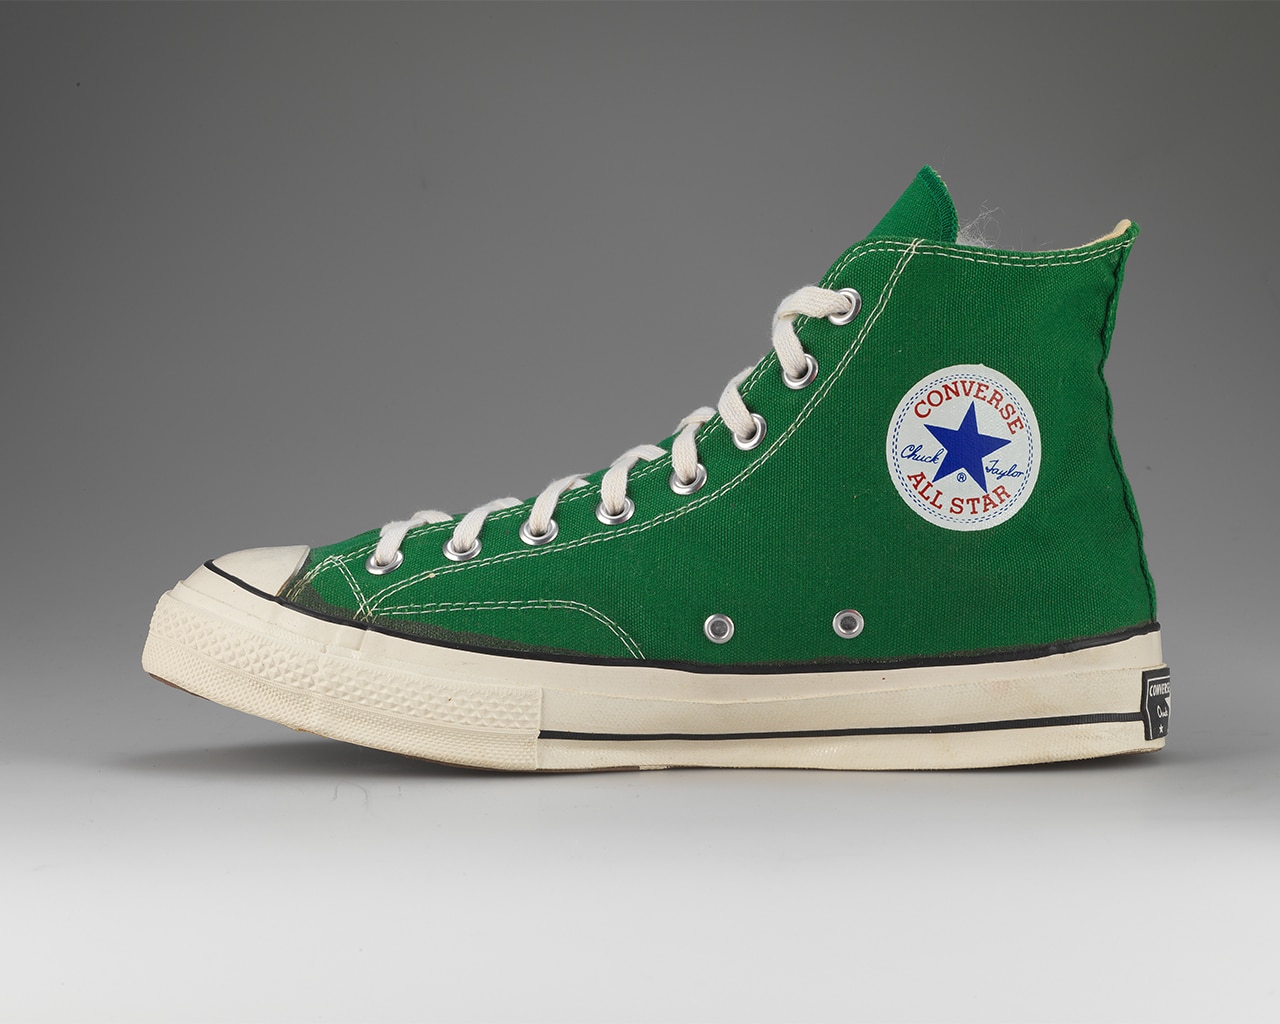 A Brief History Of The Converse Chuck Taylor Star Sneaker | The Journal | MR